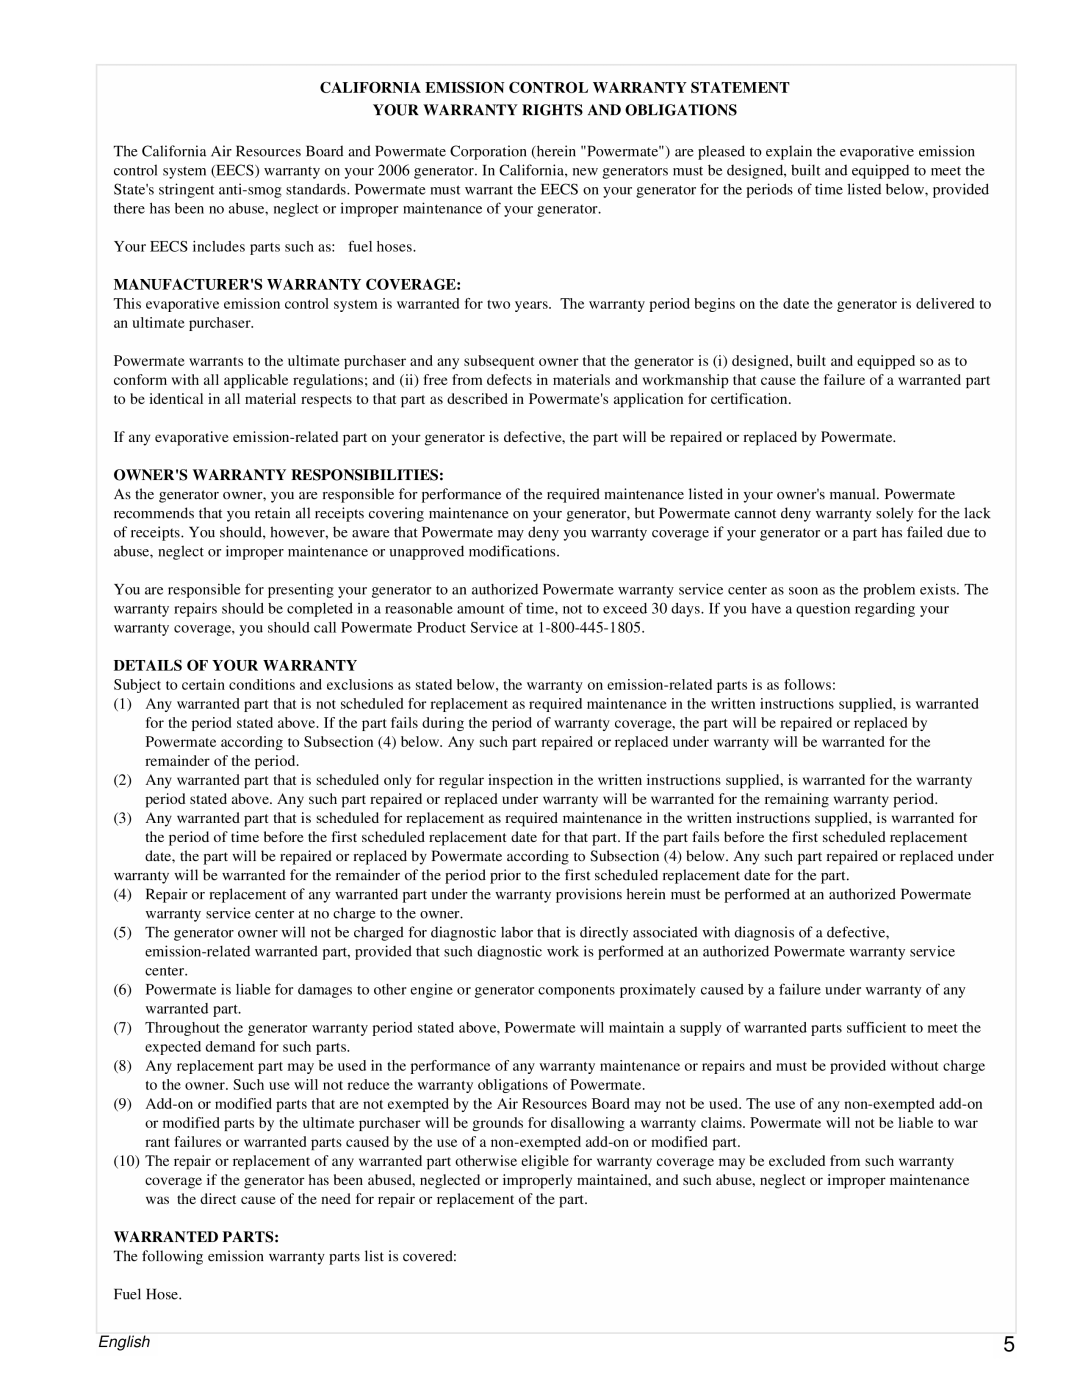 Powermate PMC496751 California Emission Control Warranty Statement, Your Warranty Rights And Obligations, Warranted Parts 